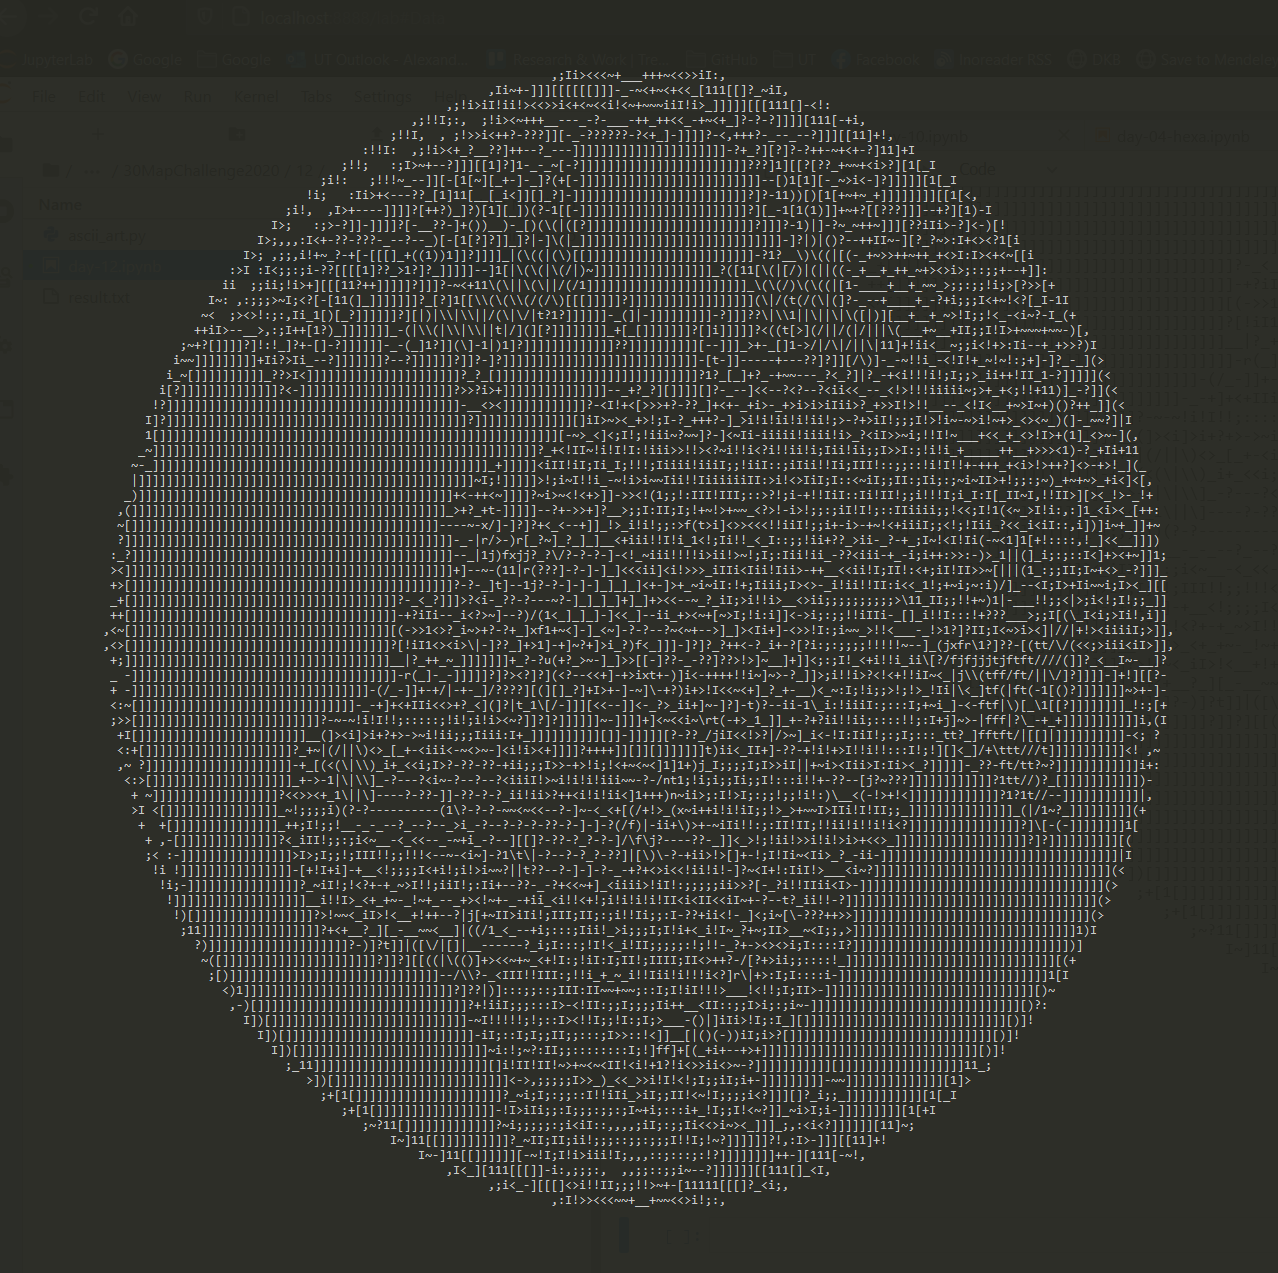 _images/day-12-ascii-globe.png